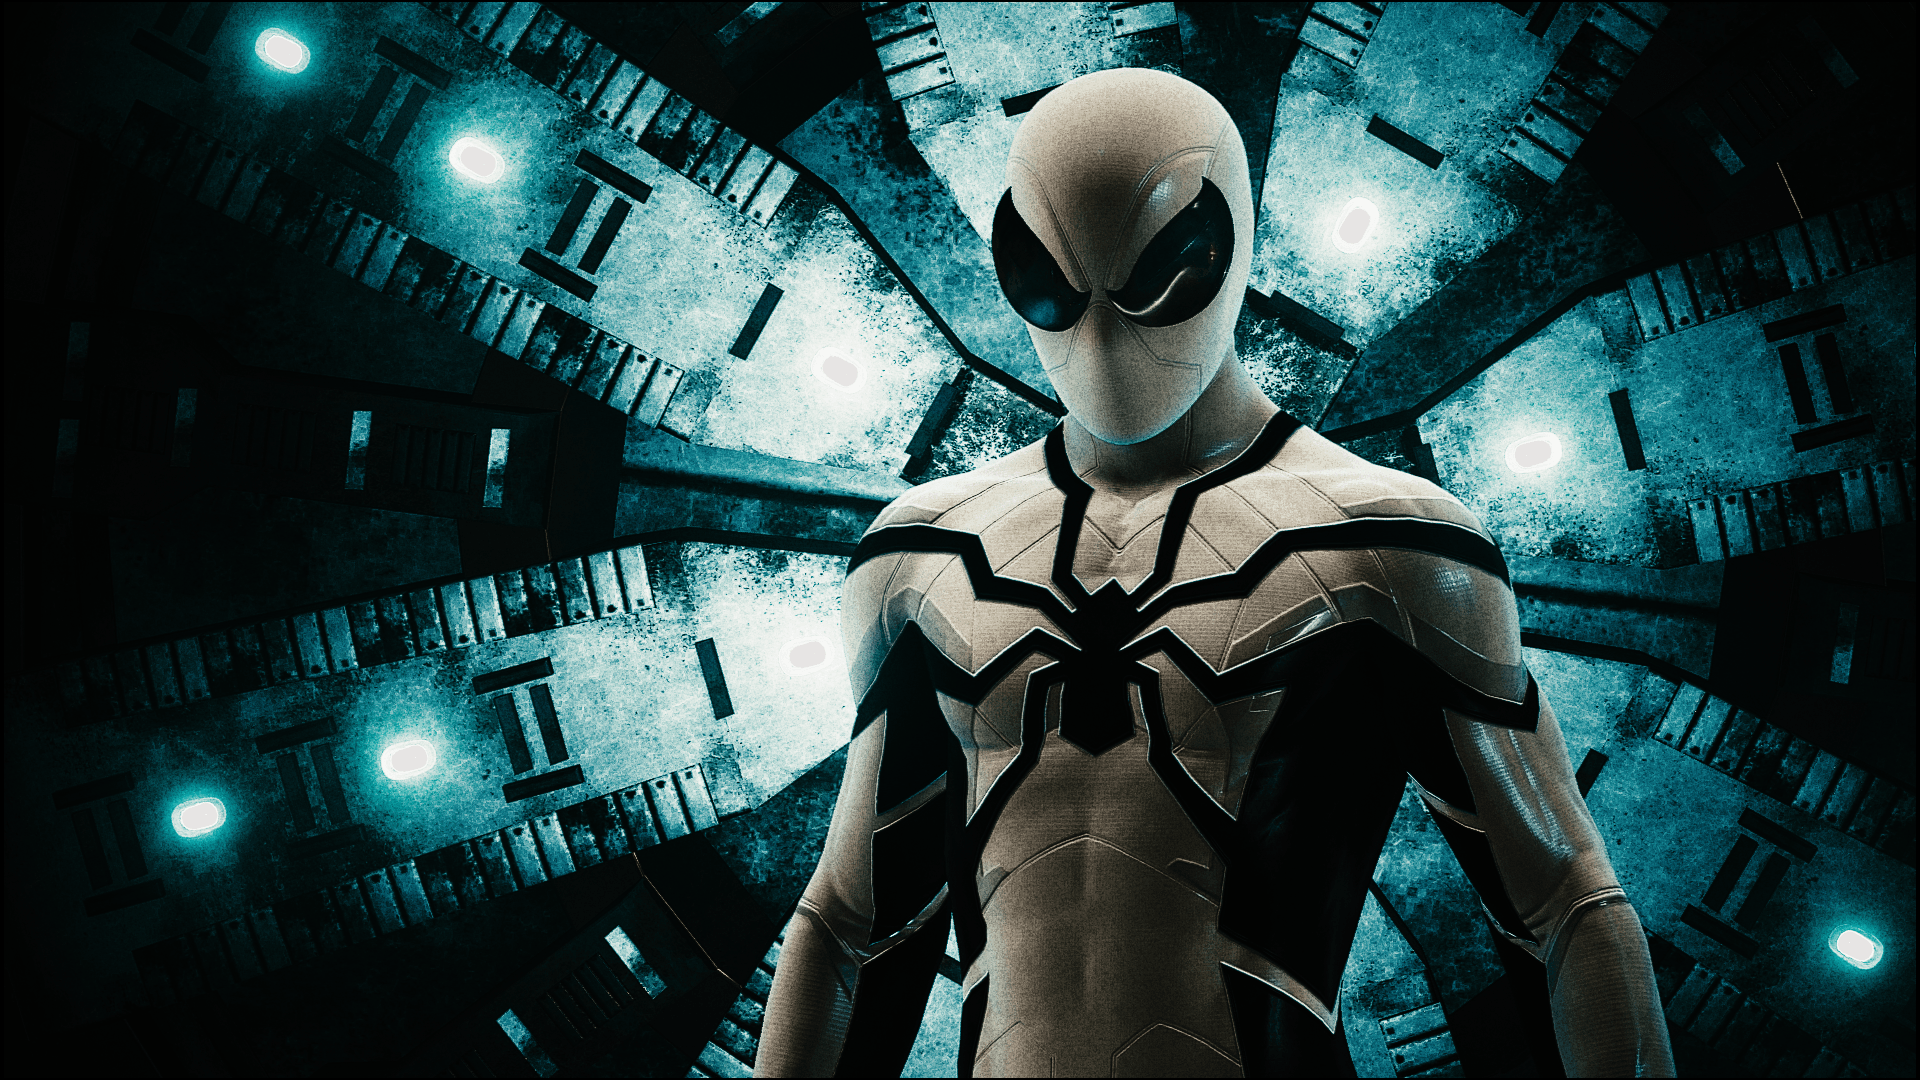 Tons of awesome Future Foundation Spiderman wallpapers to download for free...